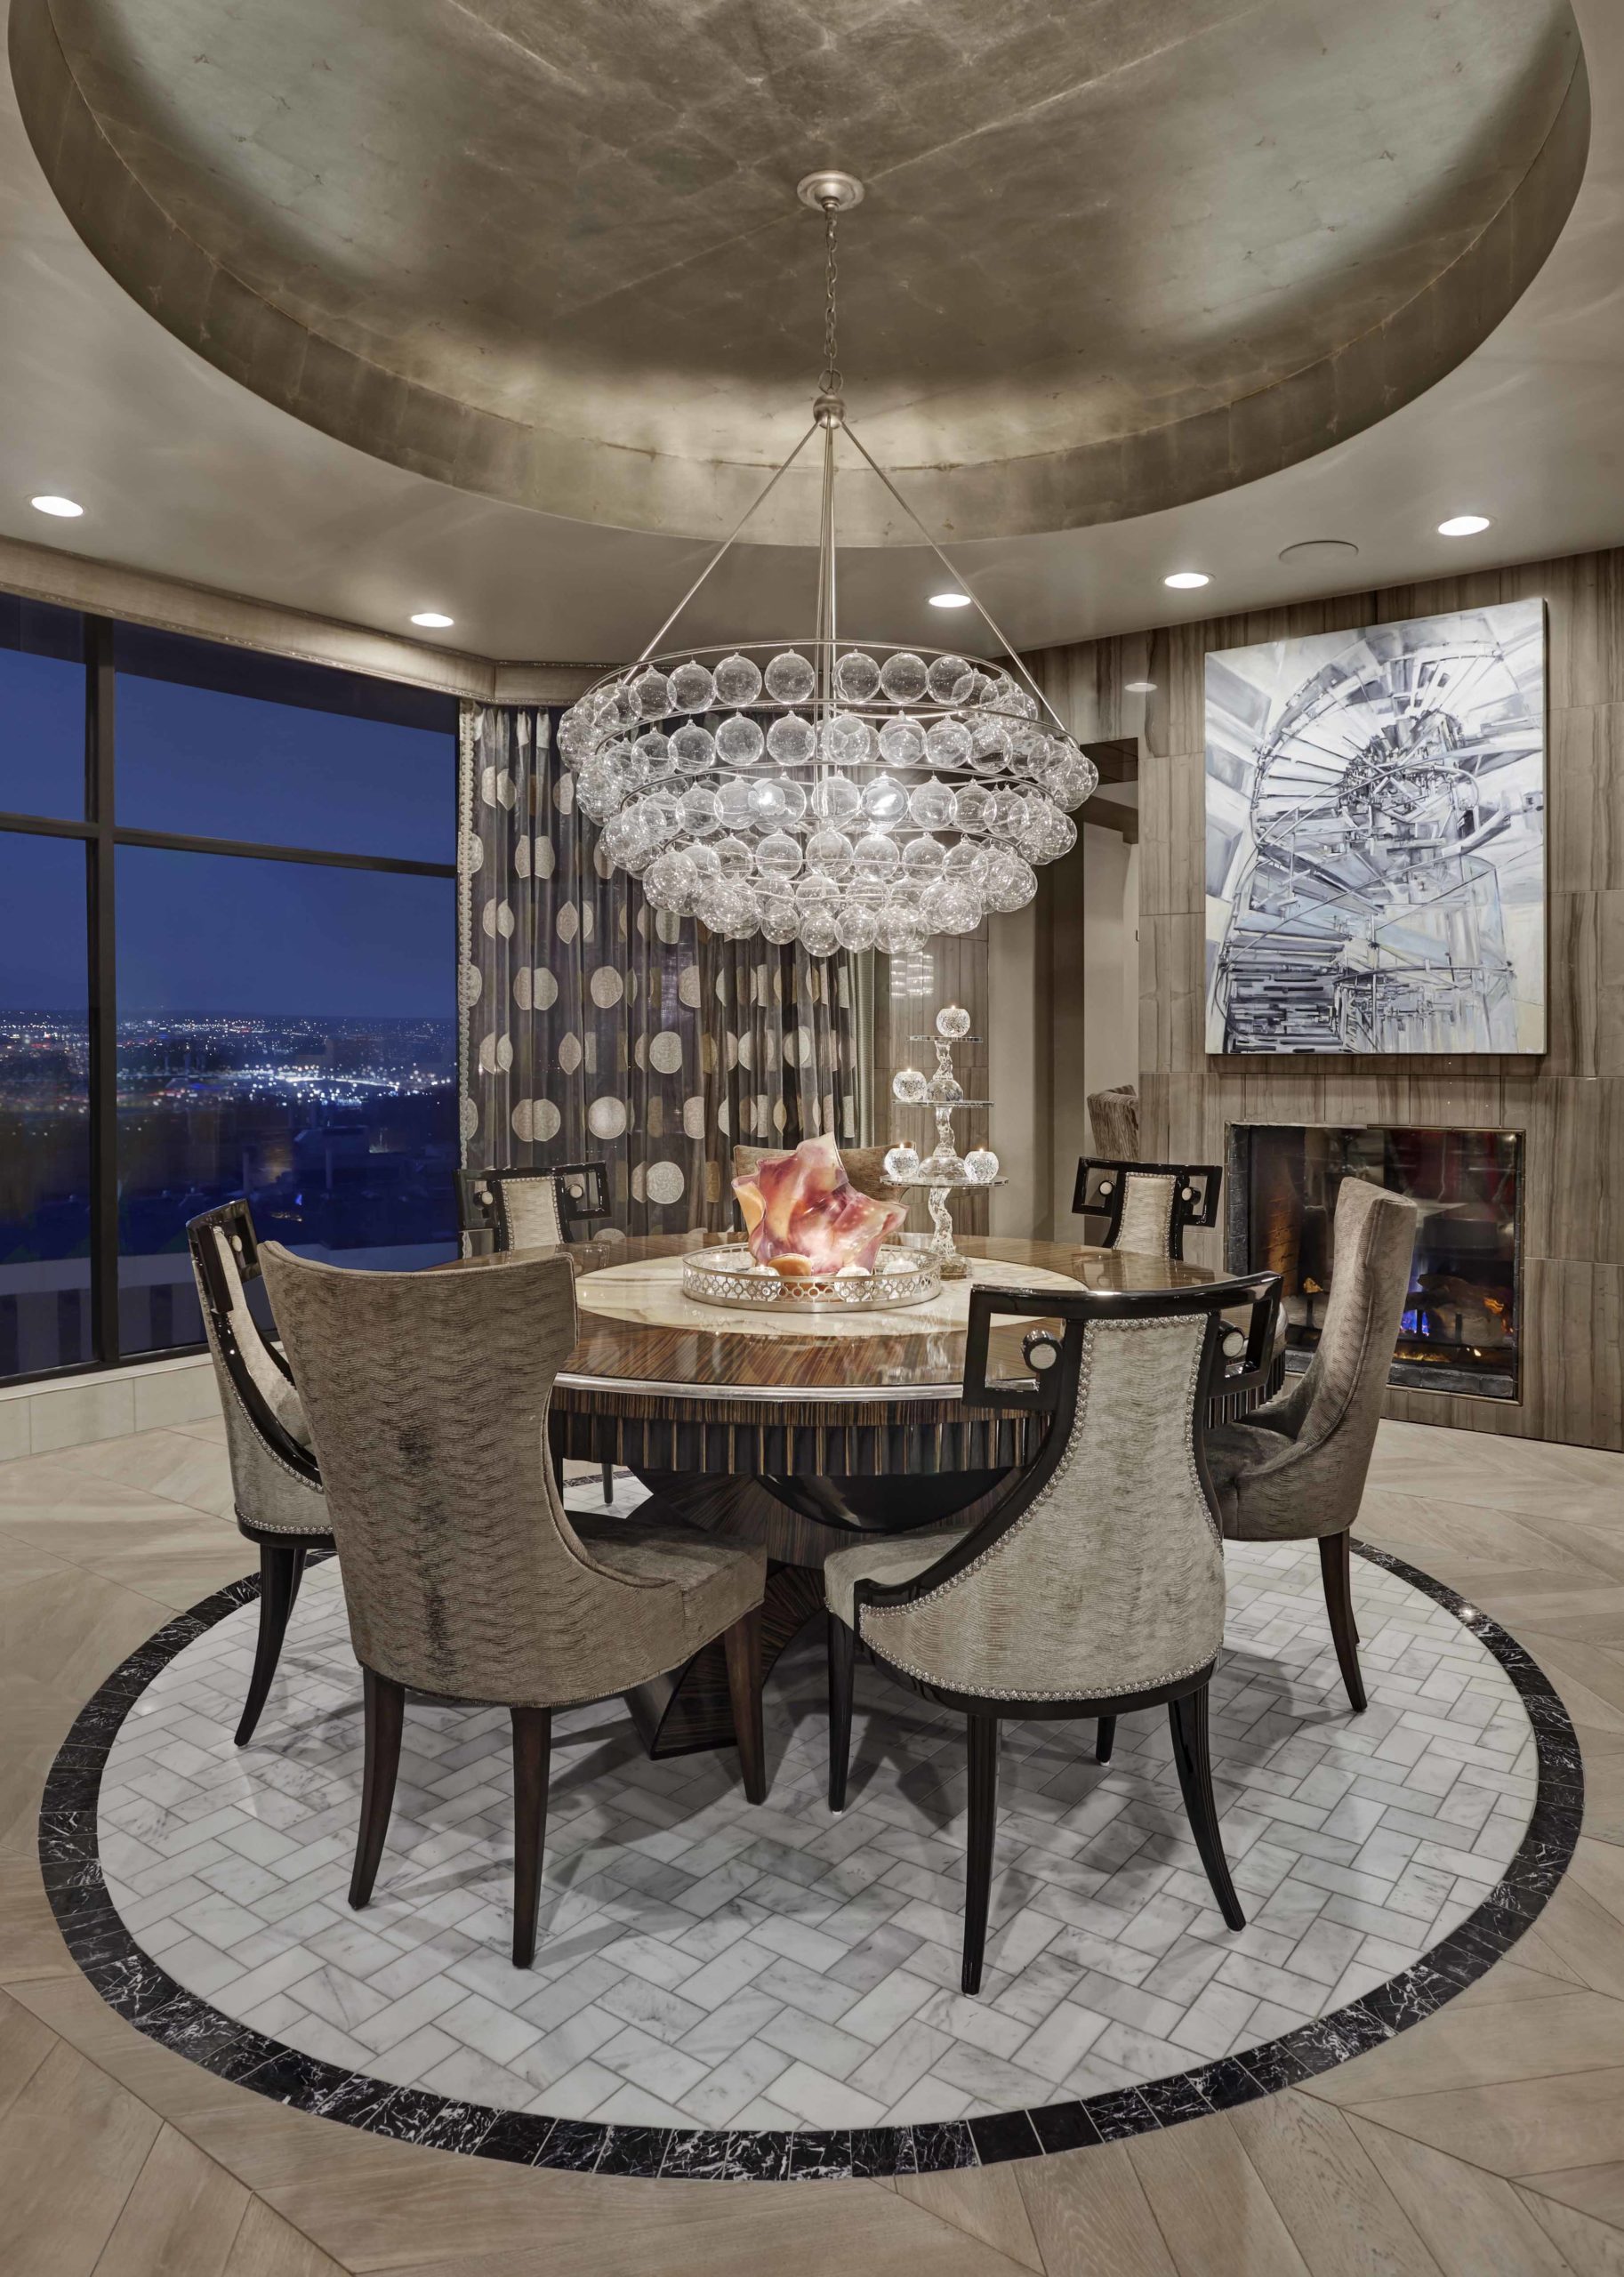 Dining room with round table and big chandelier hanging over the table